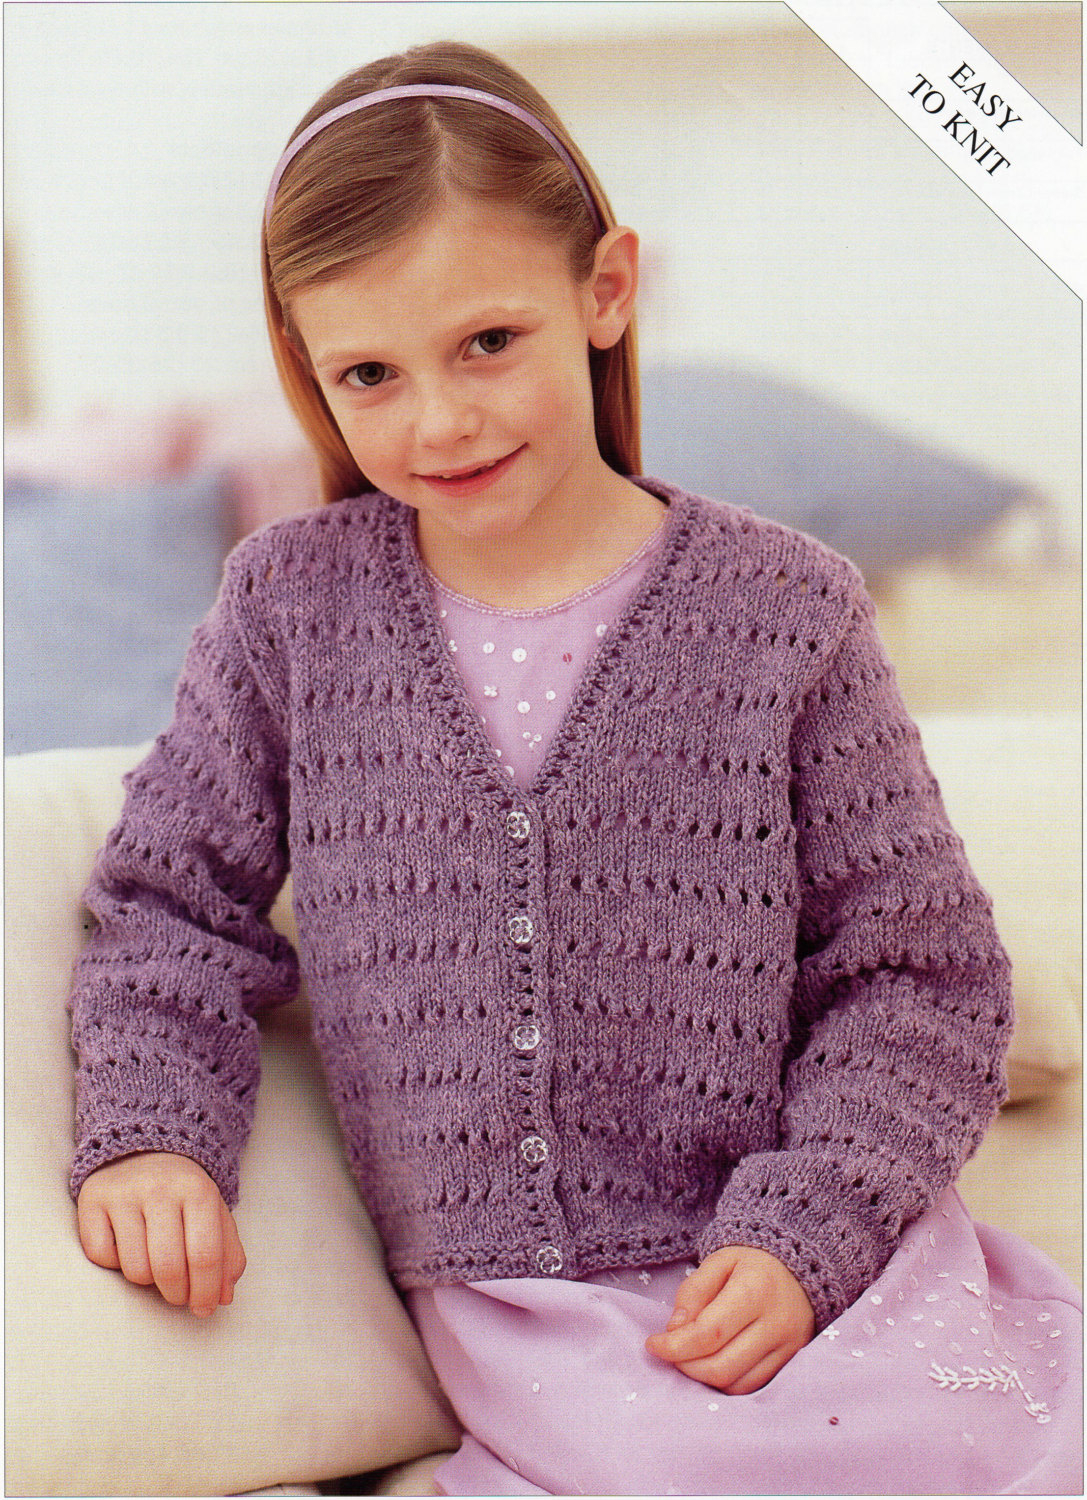 Knitted Childrens Sweaters Free Patterns Girls Knitting Pattern Girls Cardigan Childs Cardigan Easy Knit V Neck Cardigan 22 32inch Dk Childrens Knitting Pattern Pdf Instant Download